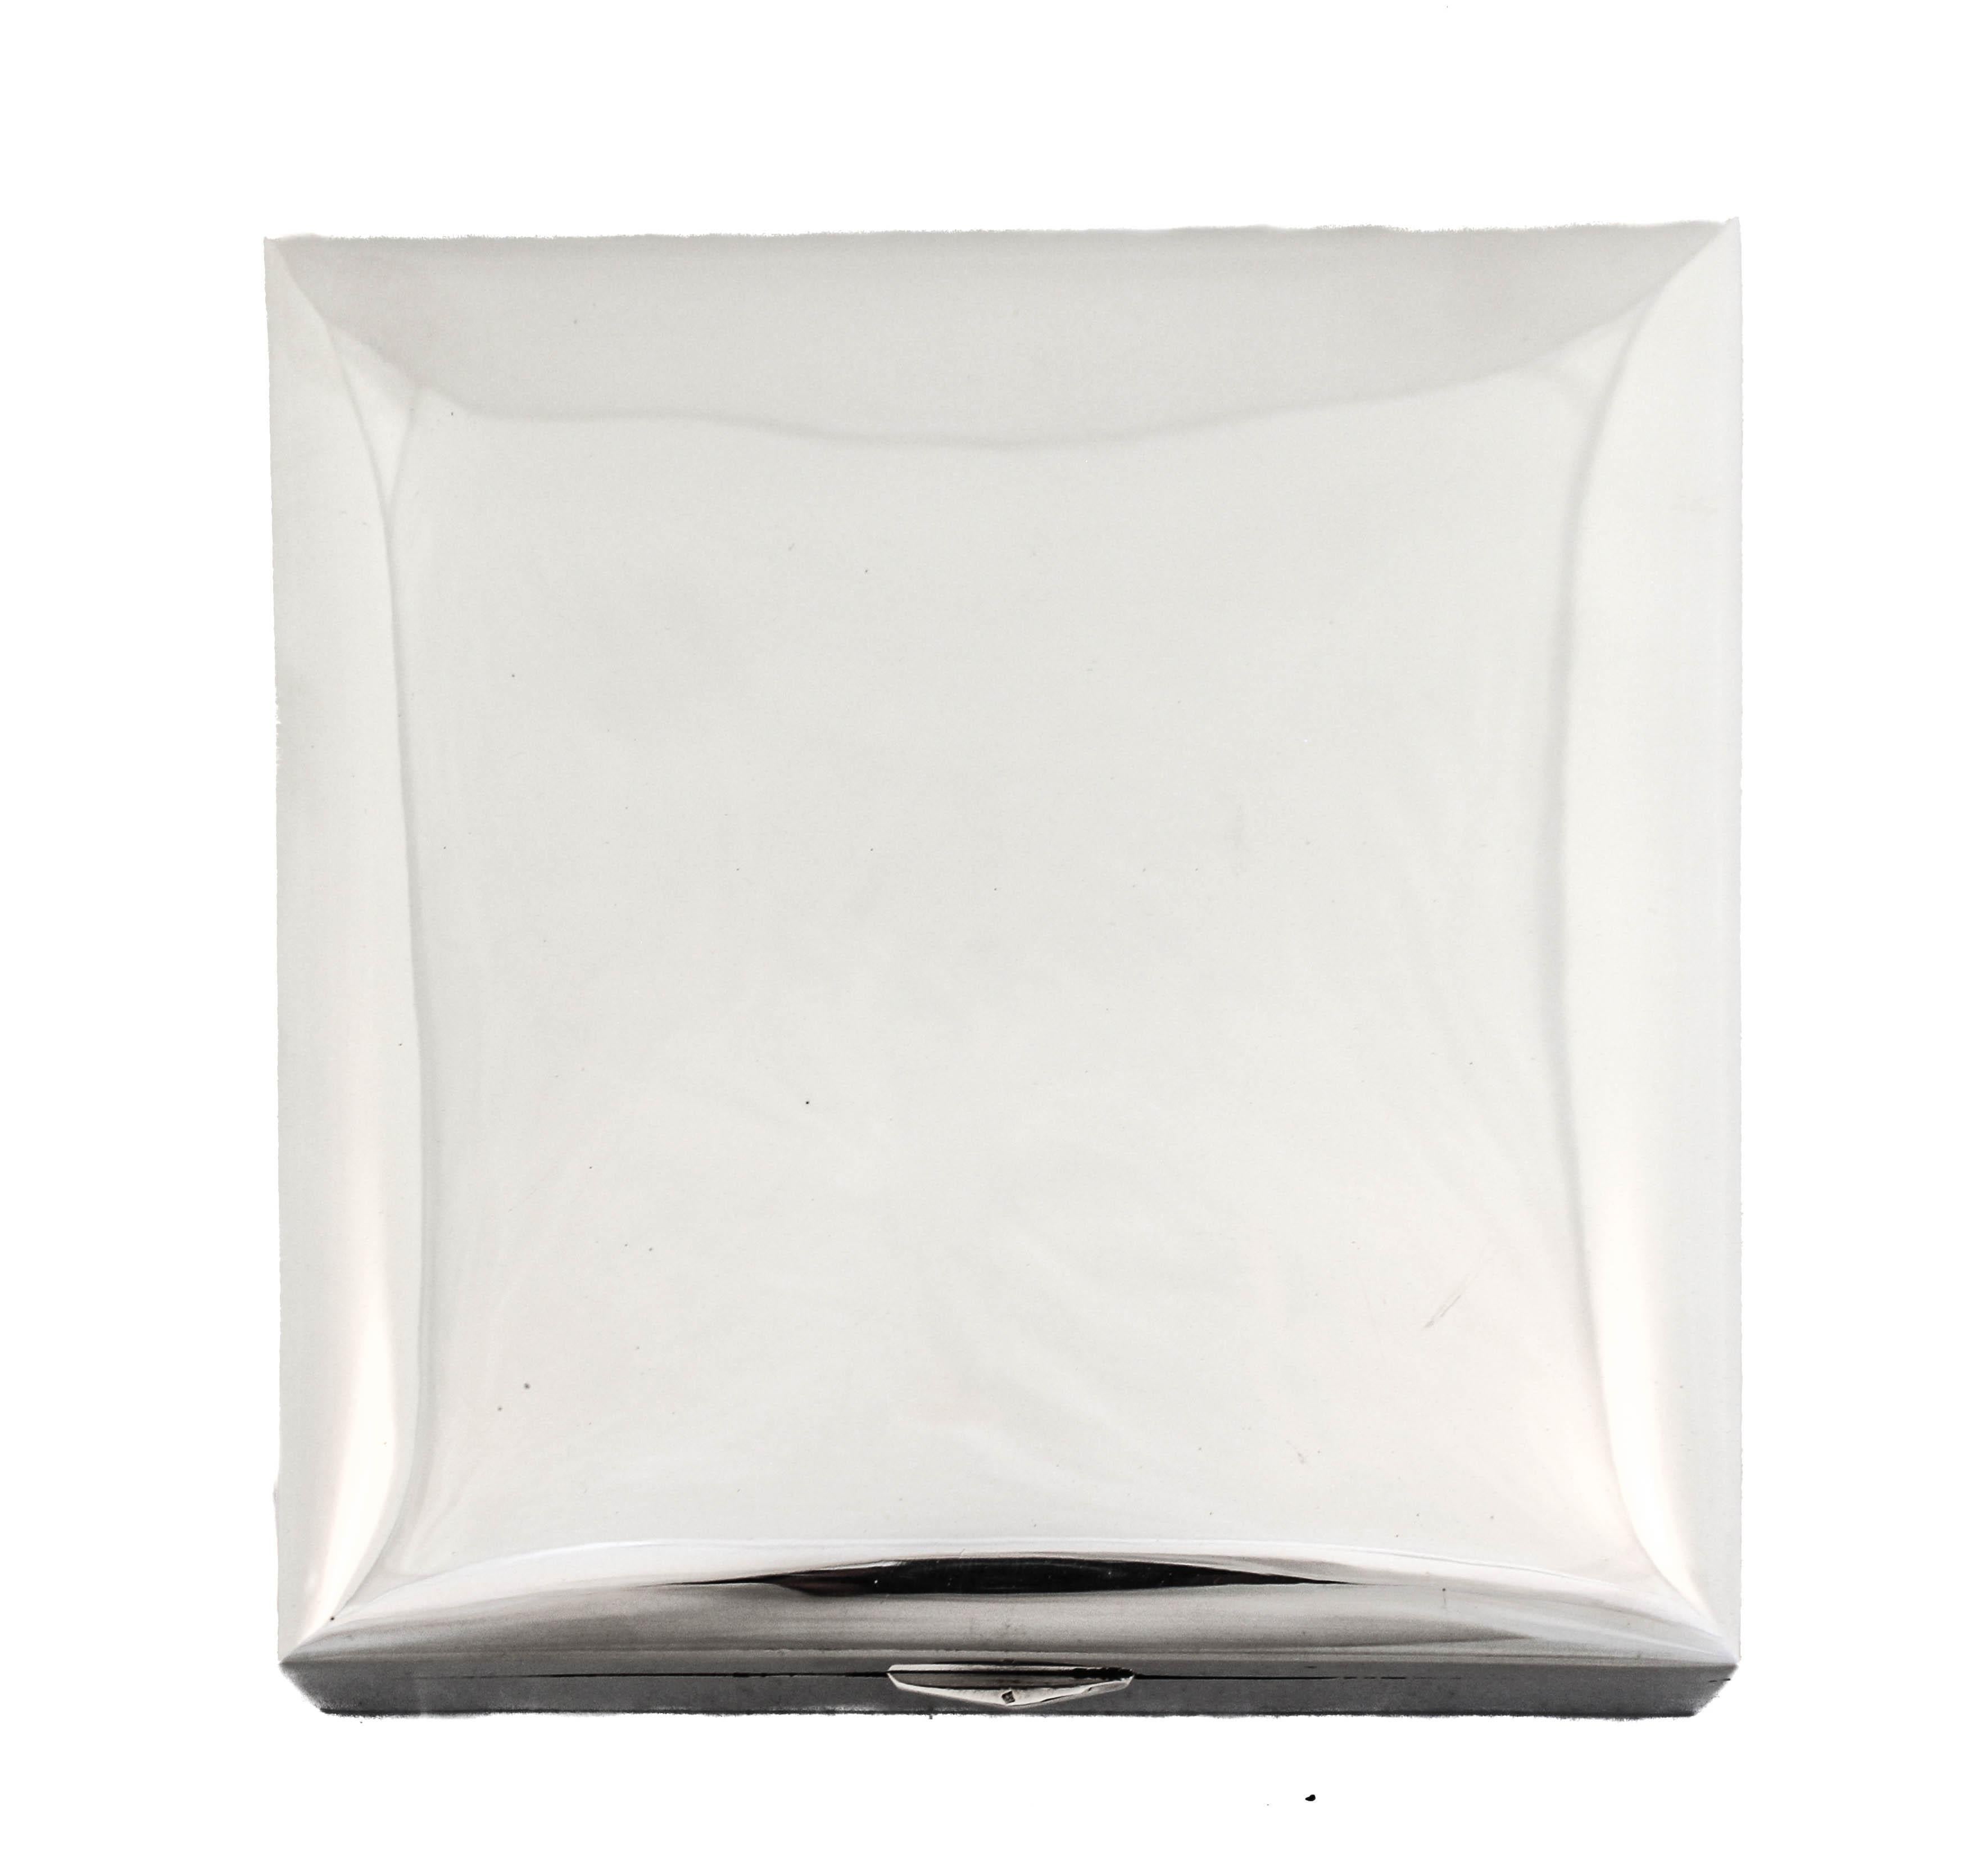 We are thrilled to offer you this sterling silver men’s (jewelry) box. It is rather large so start shopping! A very masculine piece with no etchings or ornamentation. Just a great square shape and a modern look. A special gift for that special man